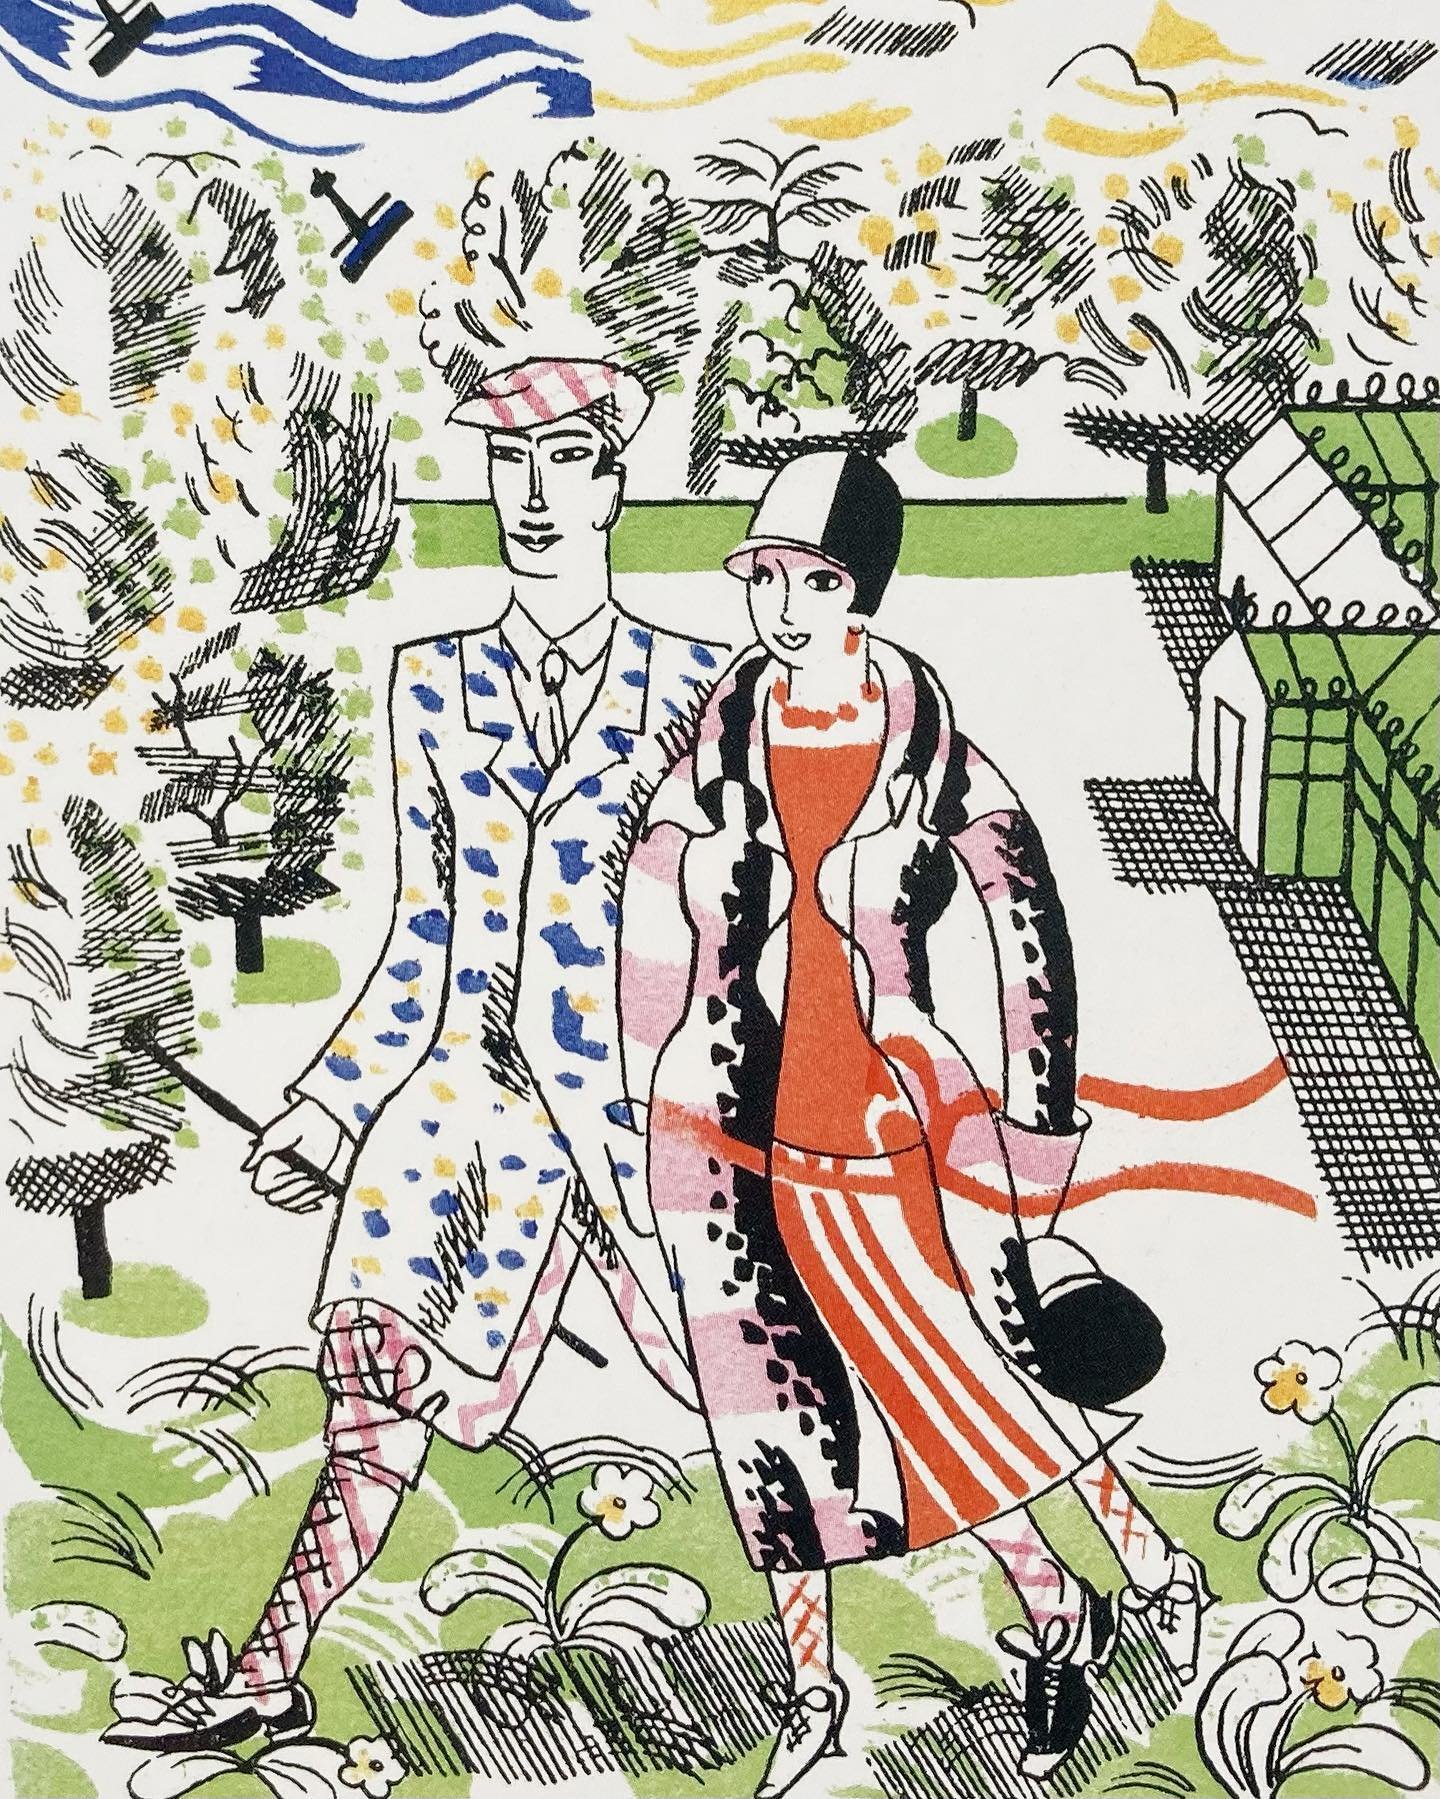 It&rsquo;s the bank holiday weekend! 
Any plans? A trip to Kew Gardens, a dip in the sea? A ride on a vintage steam train? Or are you staying put with your feet up in the back garden? I&rsquo;m off paddleboarding! 

Here are some lovely #edwardbawden